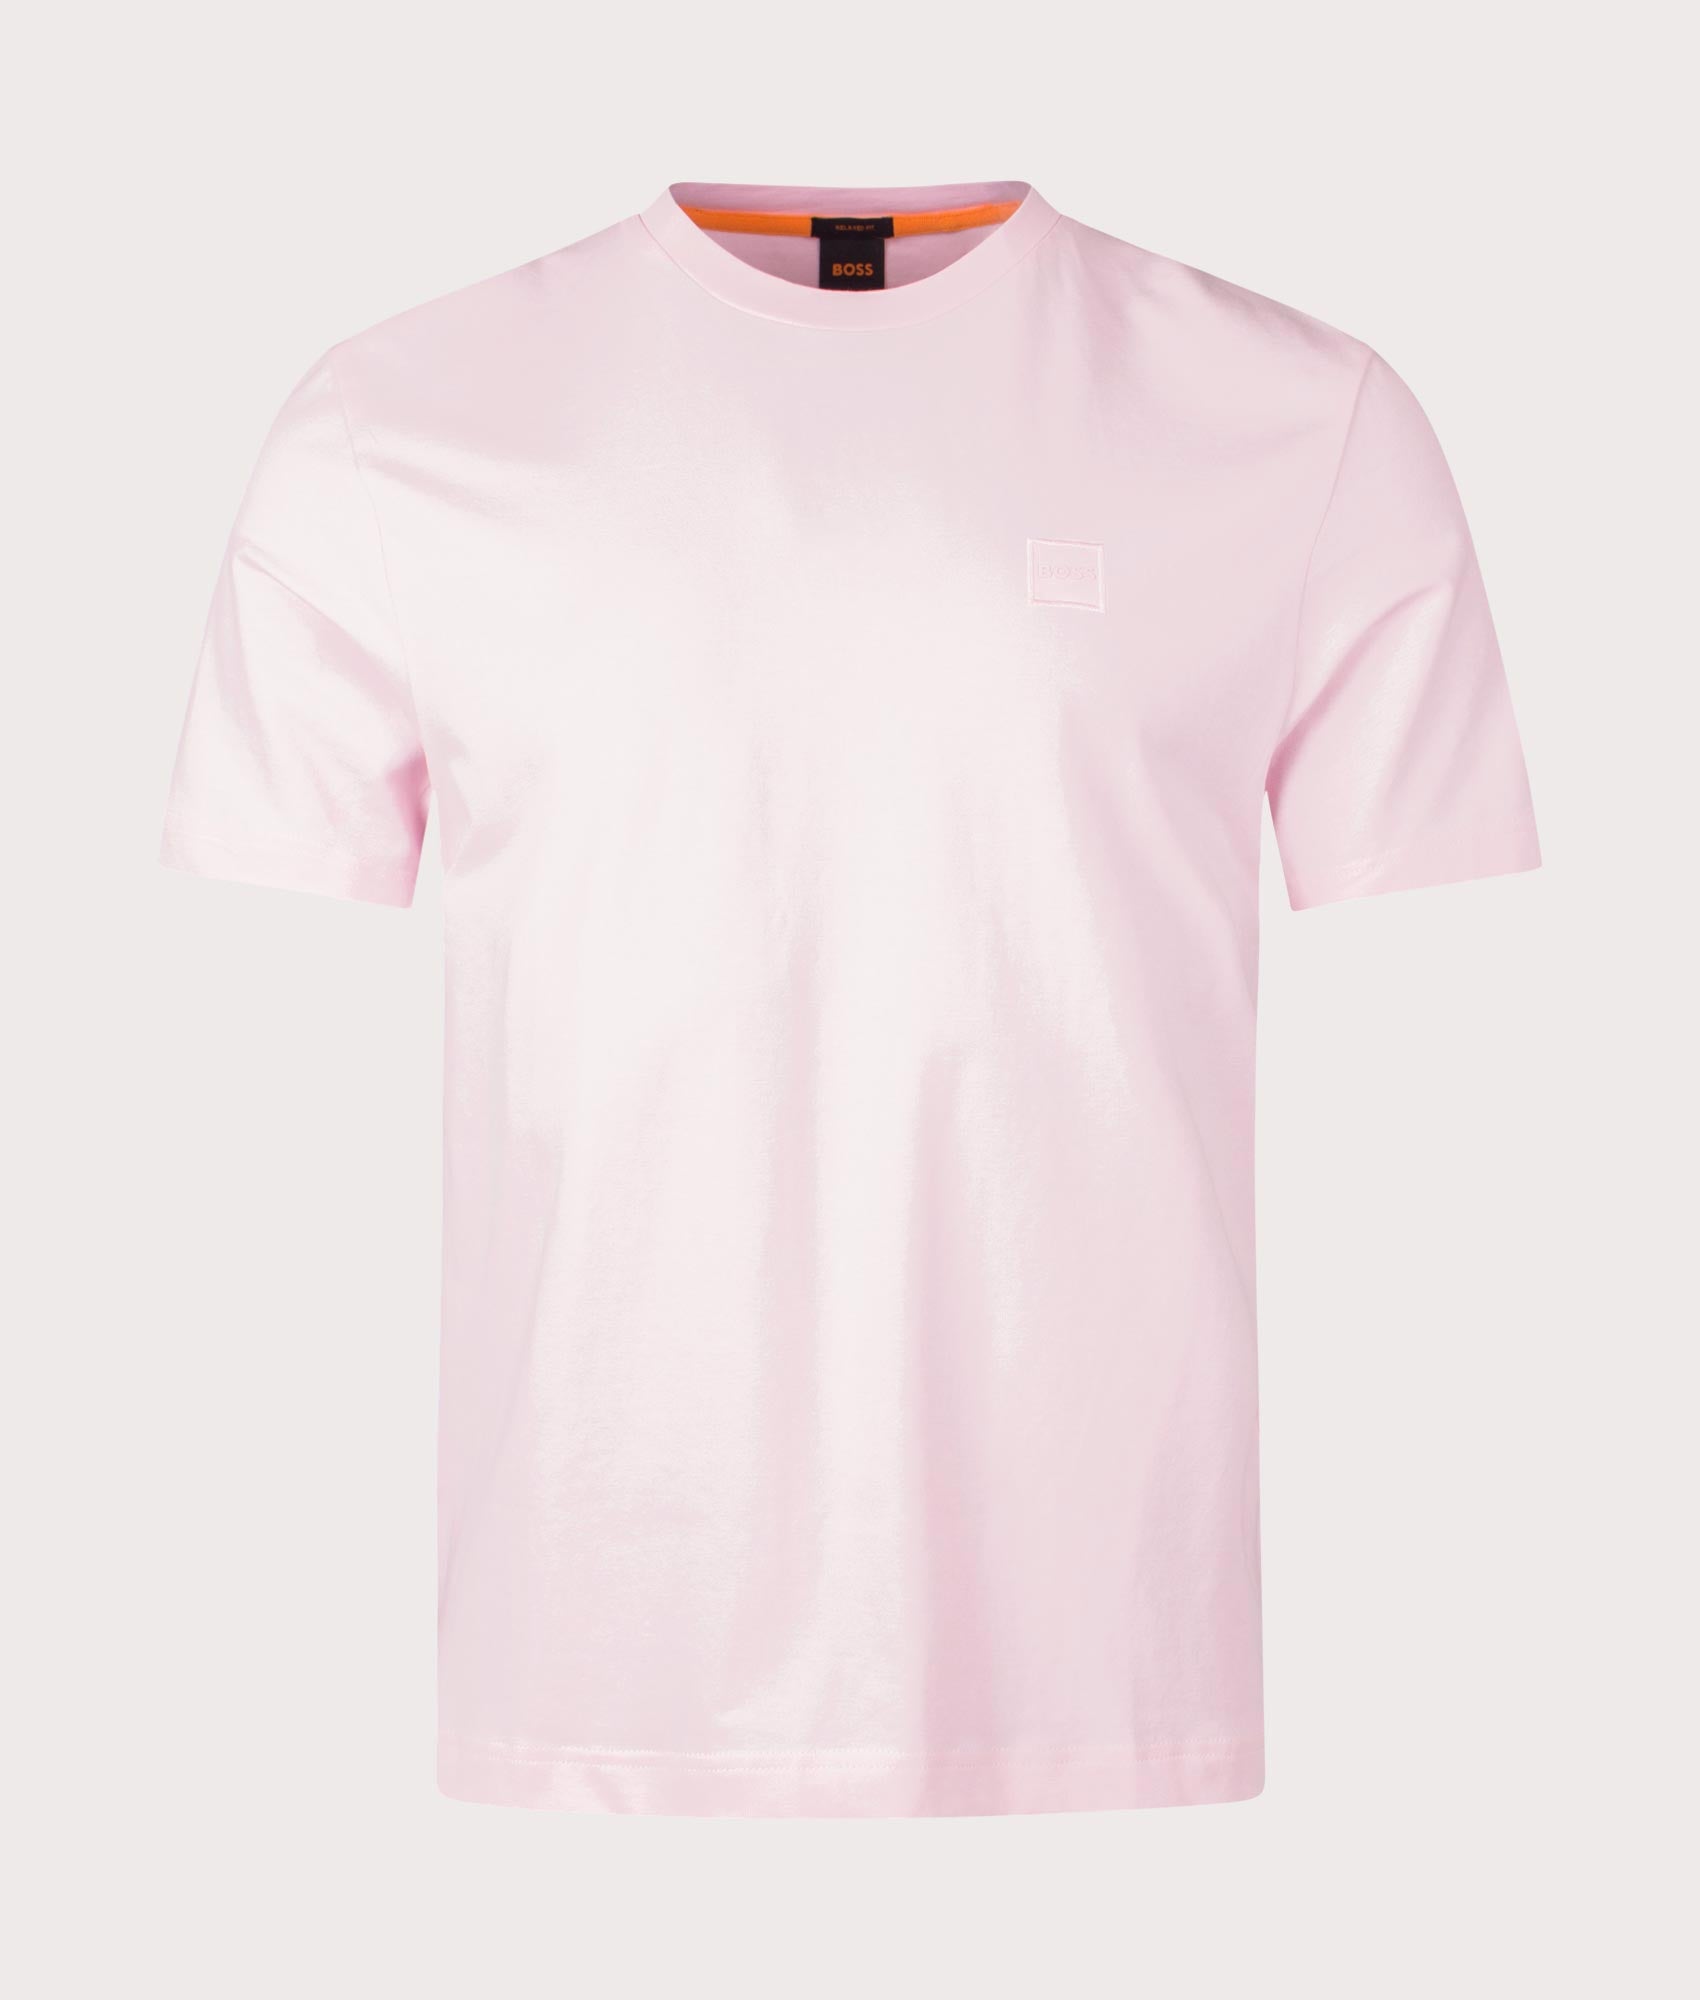 BOSS Mens Relaxed Fit Tales T-Shirt - Colour: 682 Light/Pastel Pink - Size: Large